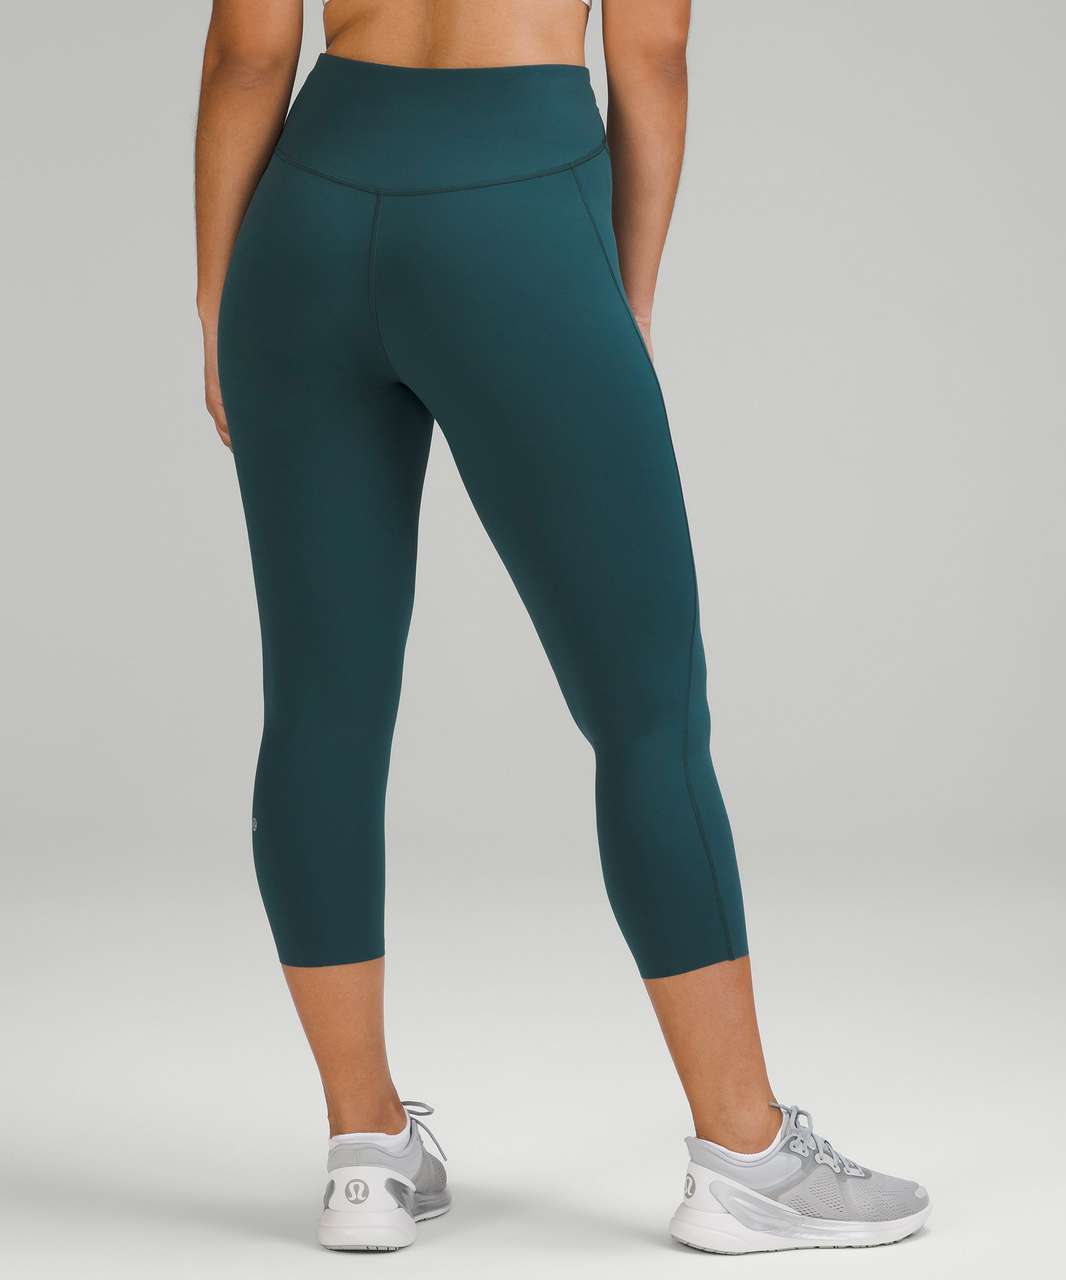 NEW Lululemon Base Pace HR Crop Running Tights Size 4 Length 23” NWT $88  Retail